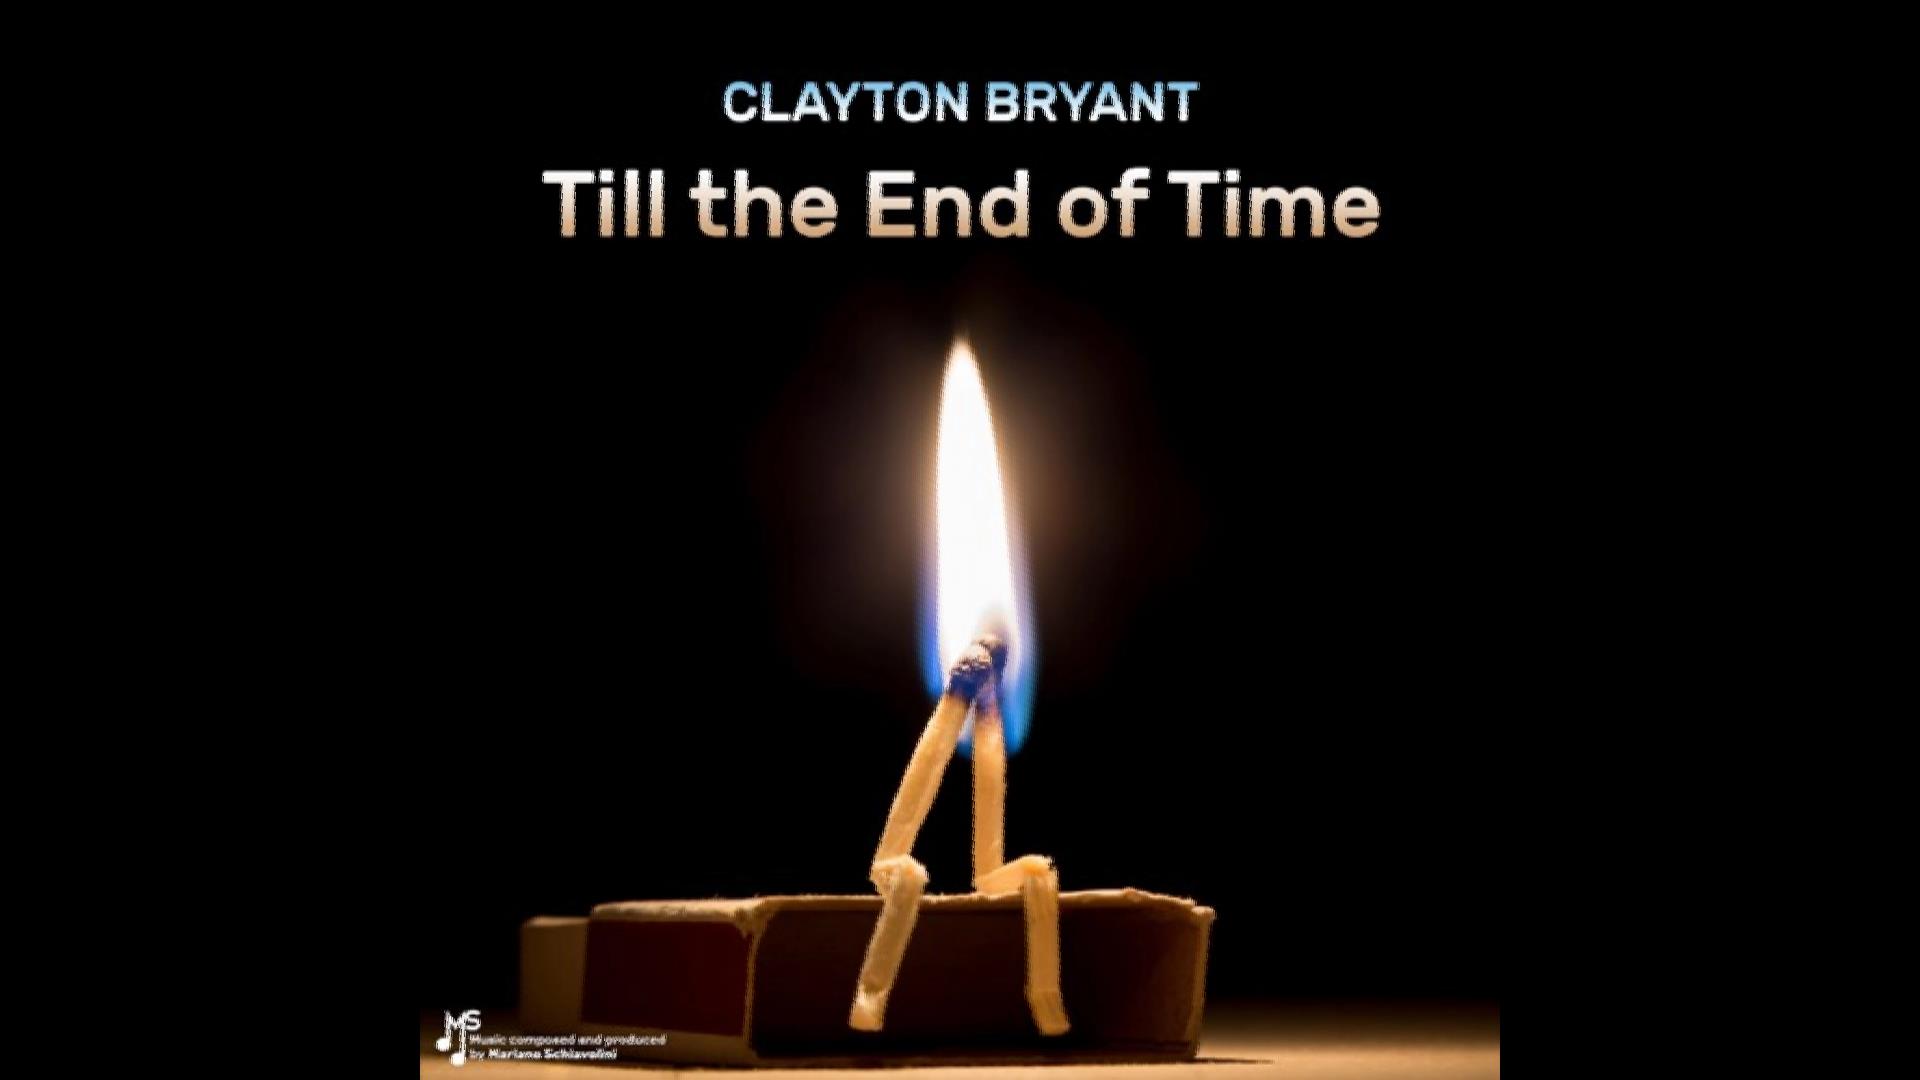  Clayton Bryant – “Where Will It End”/”Till The End Of Time”